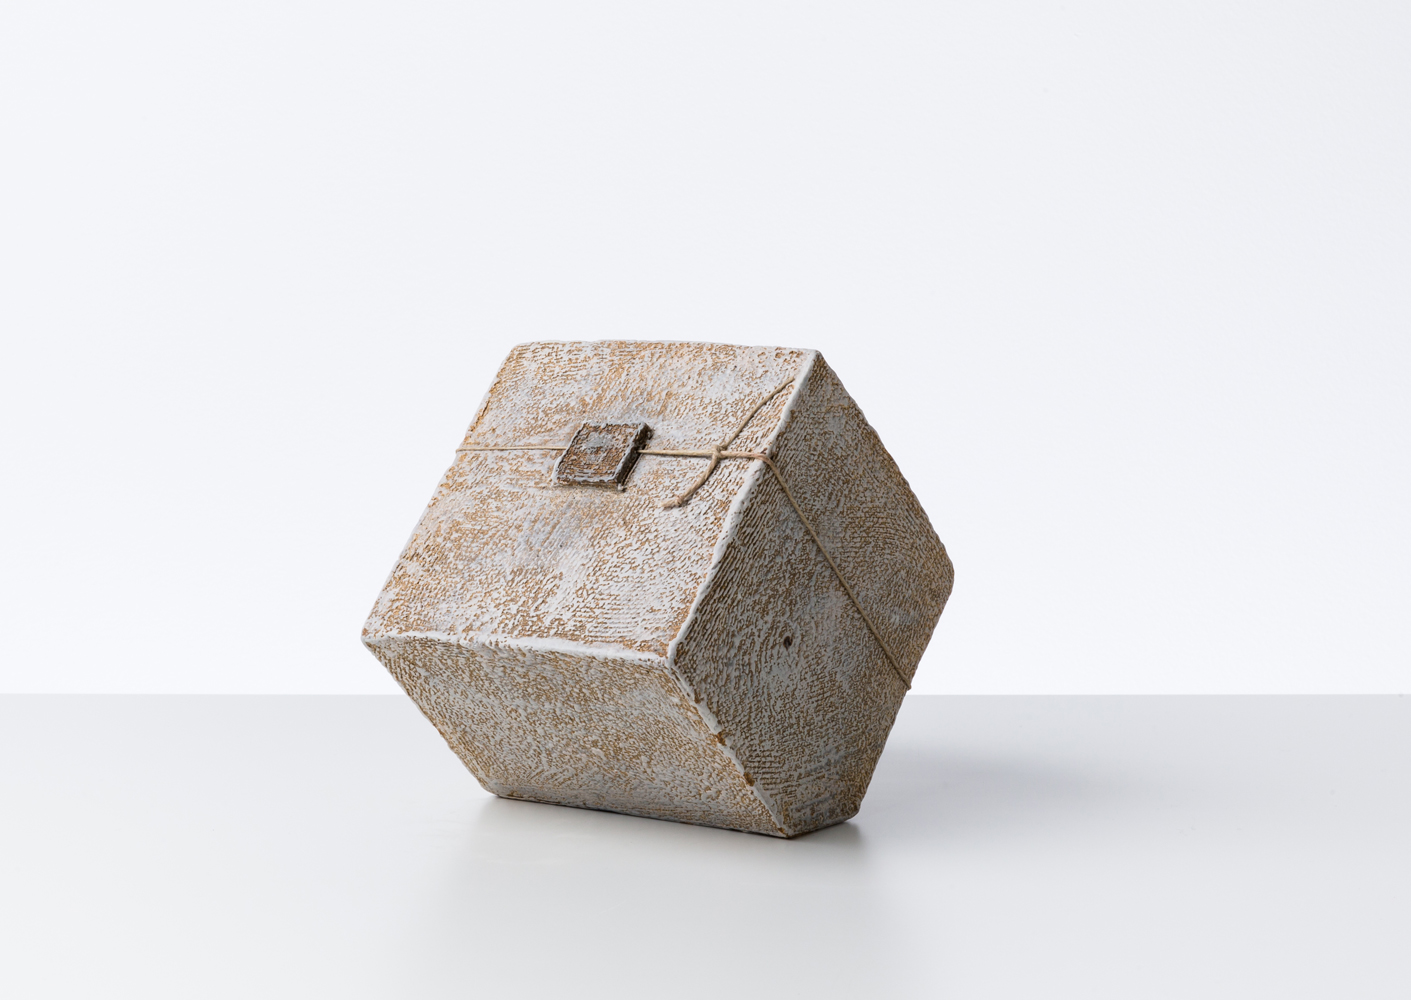 UNTITLED (TR712), 2015 stoneware, slip and hemp thread, 6 1/4 x 5 1/4 x 7 1/2 in, private collection